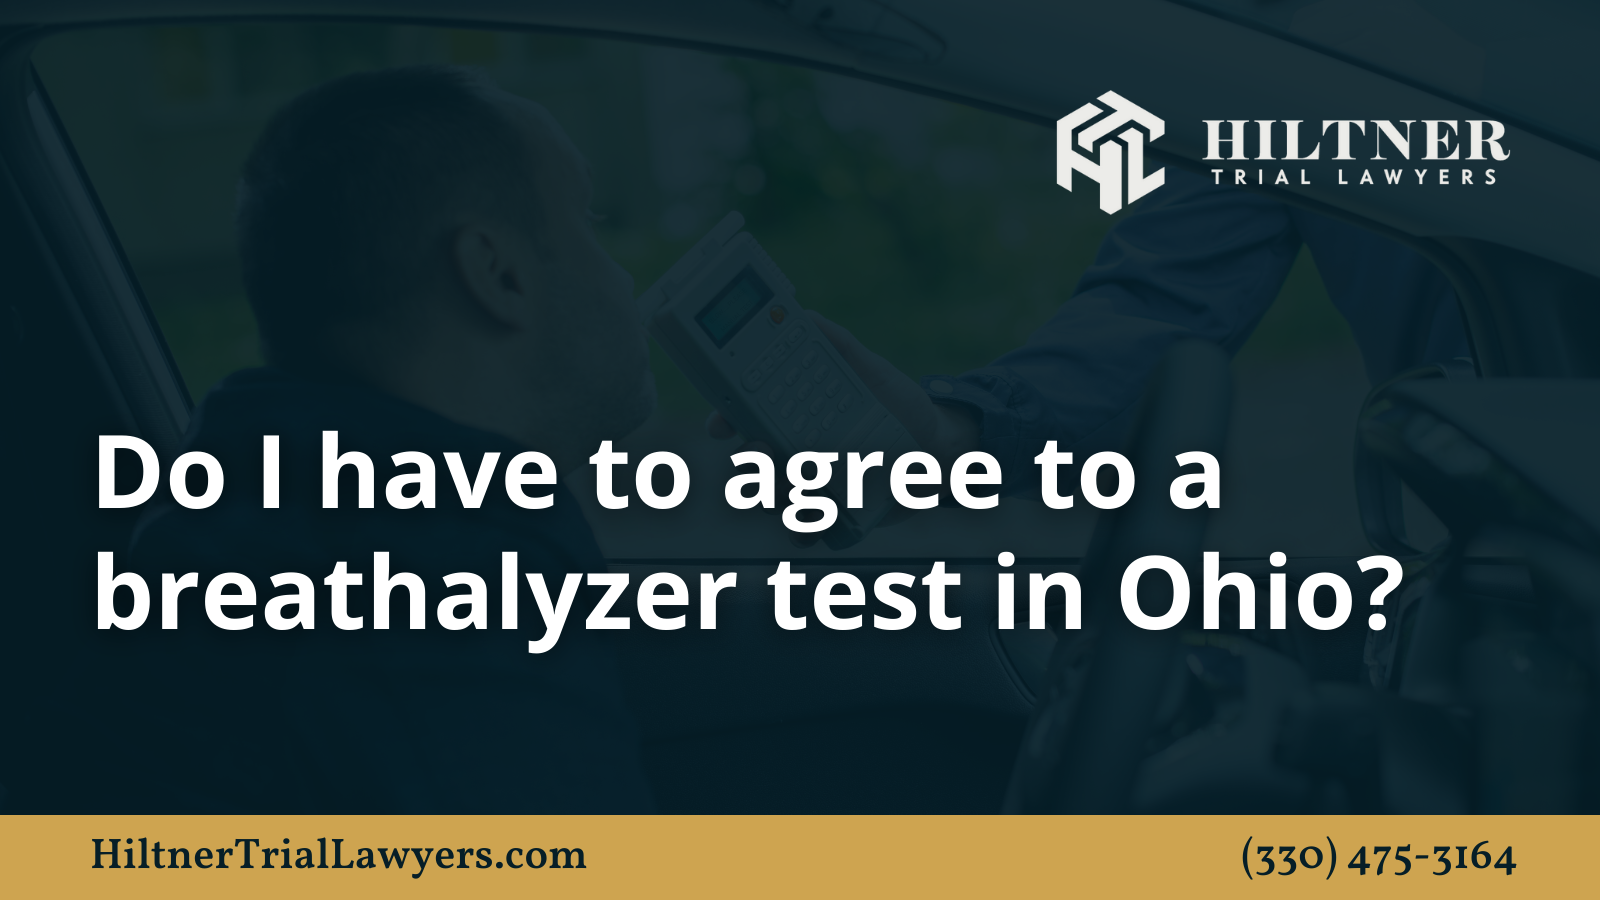 Do I have to agree to a breathalyzer test in Ohio - Hiltner Trial Lawyers Ohio - max hiltner